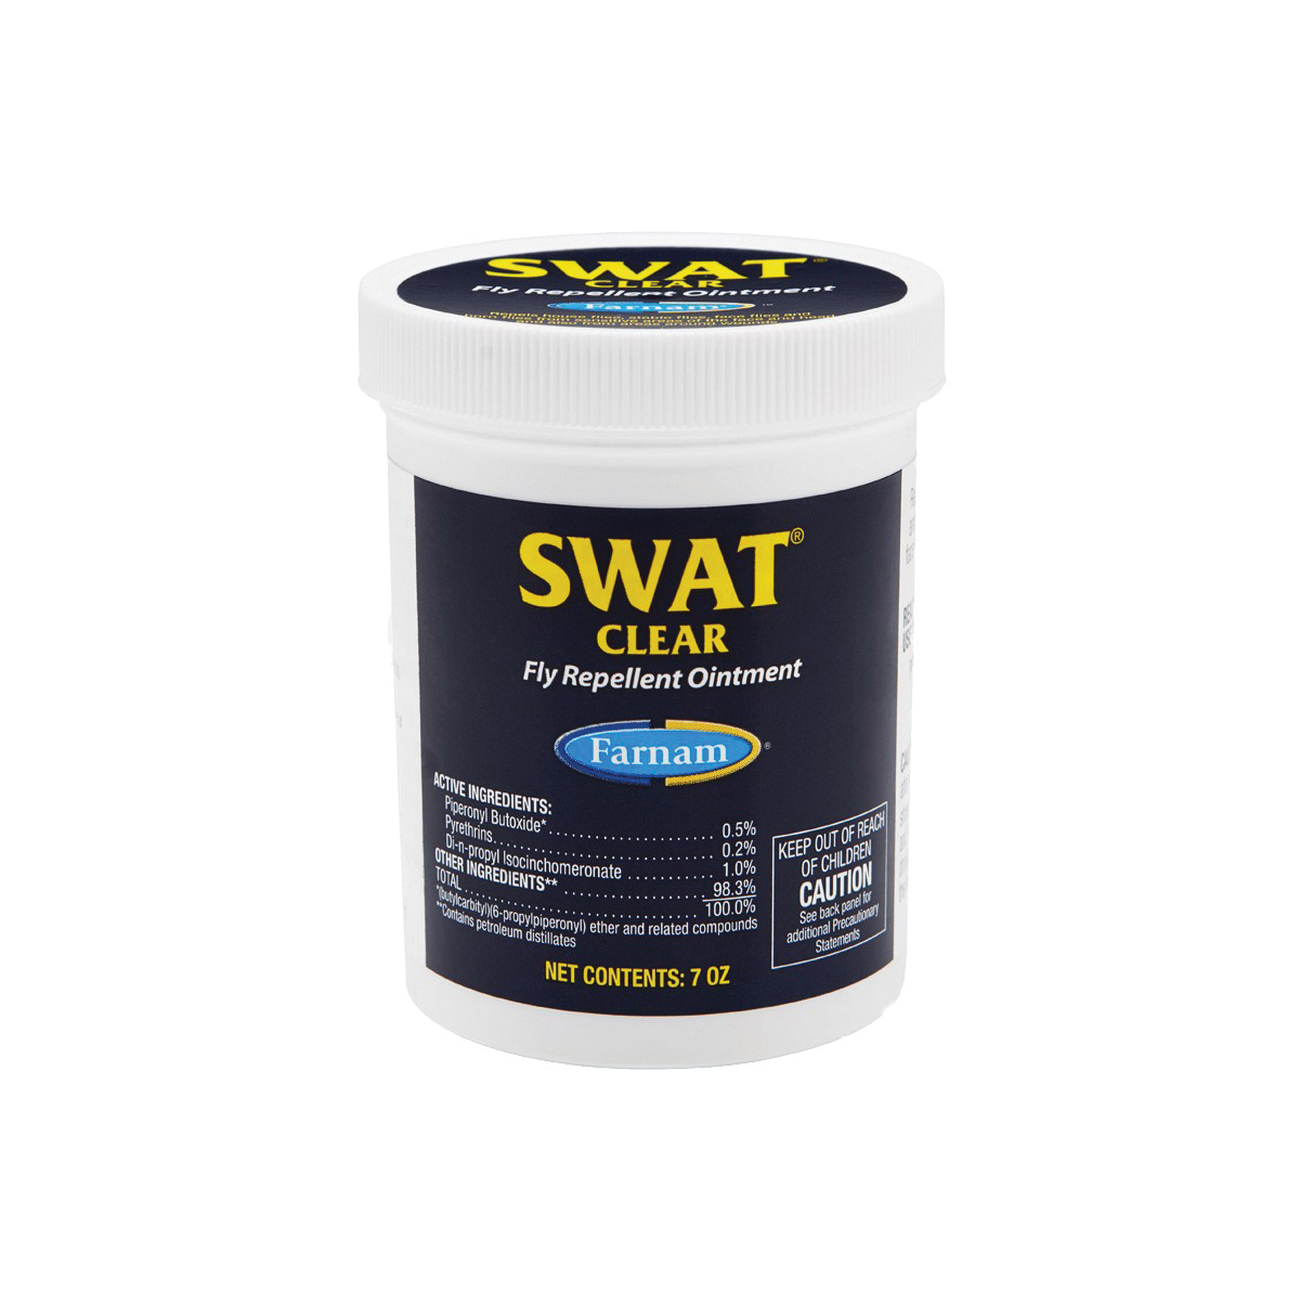 SWAT 012302 Fly Repellent Ointment, Clear, 6 oz